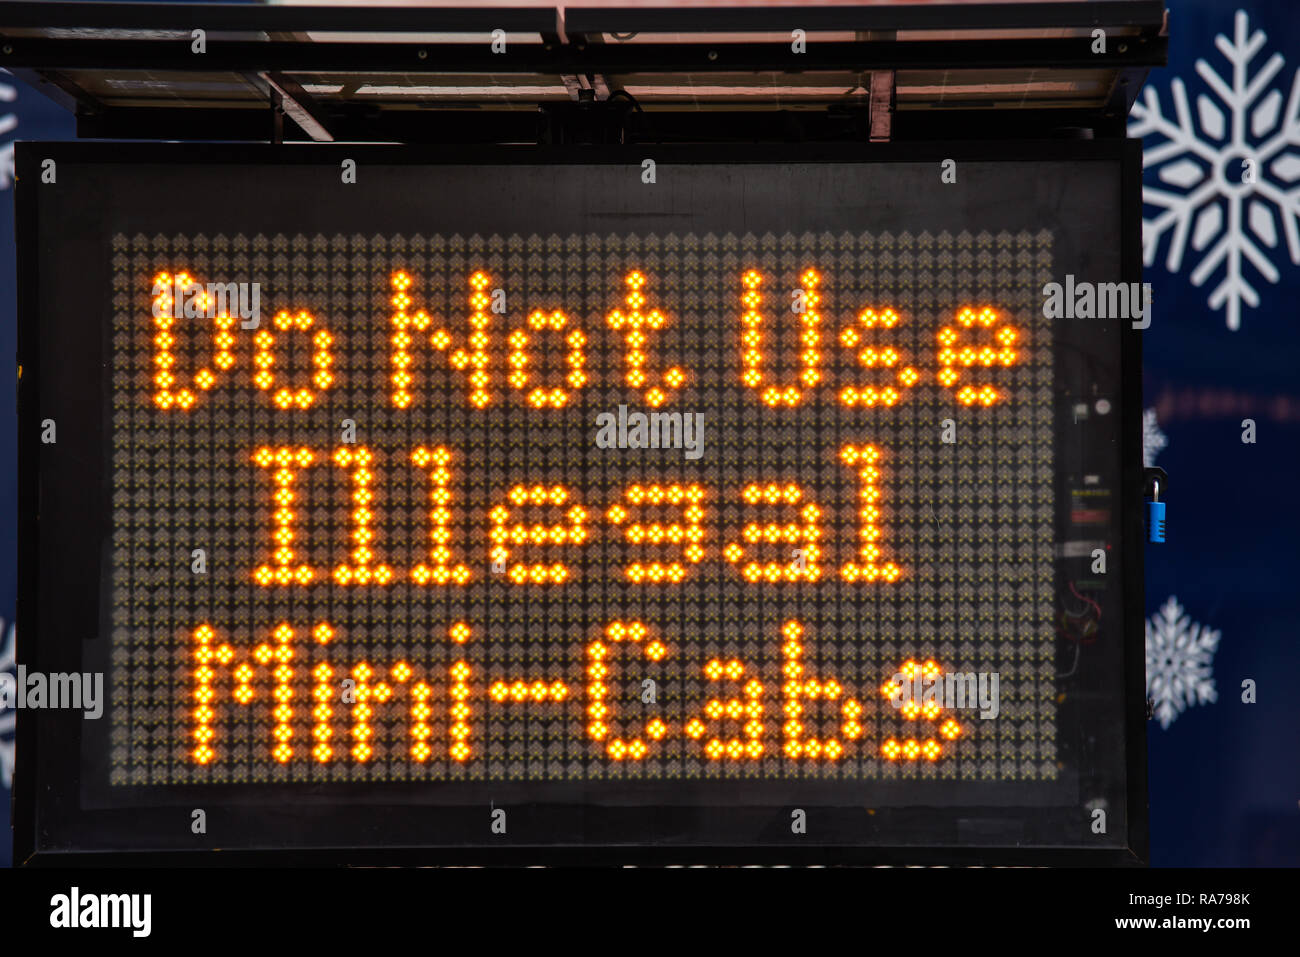 Do not use illegal mini cabs matrix sign for New Year's Eve revelers in London, UK. Warning message Stock Photo